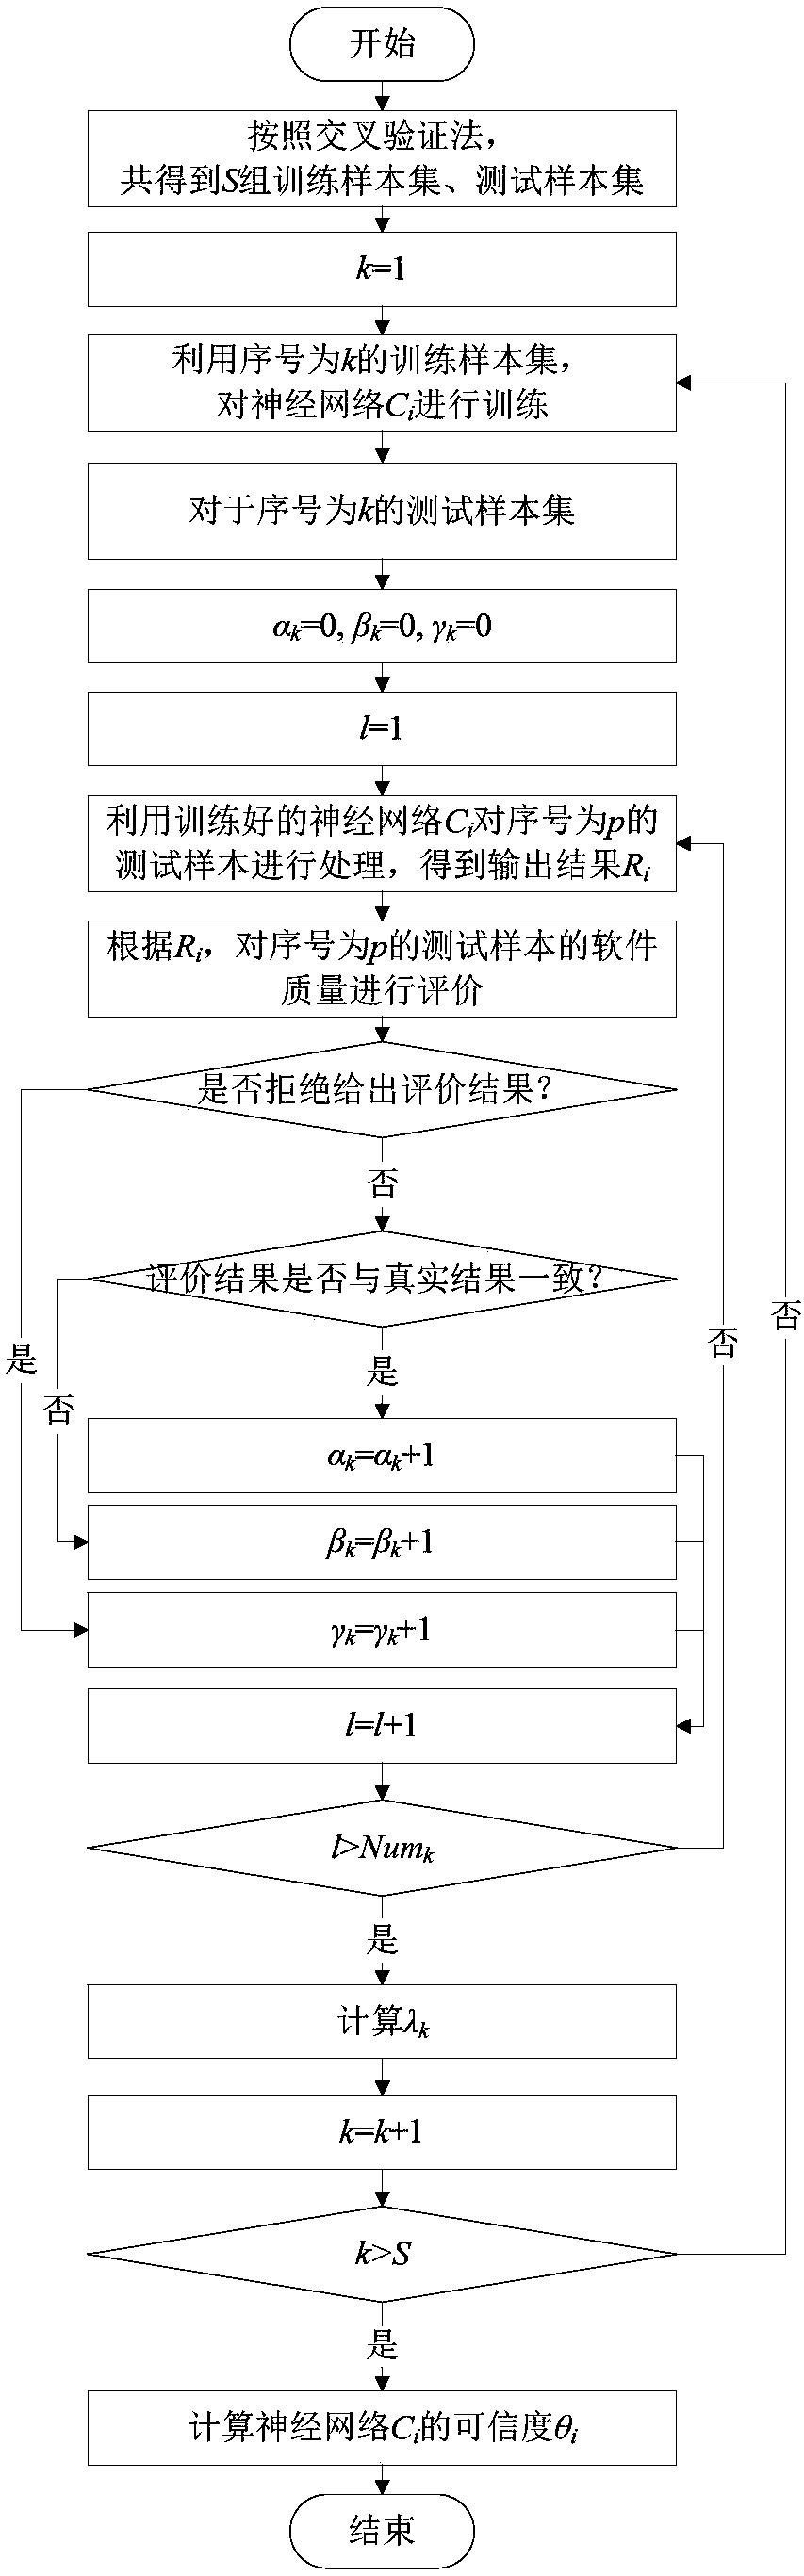 Software quality evaluation method and system based on secondary evaluation